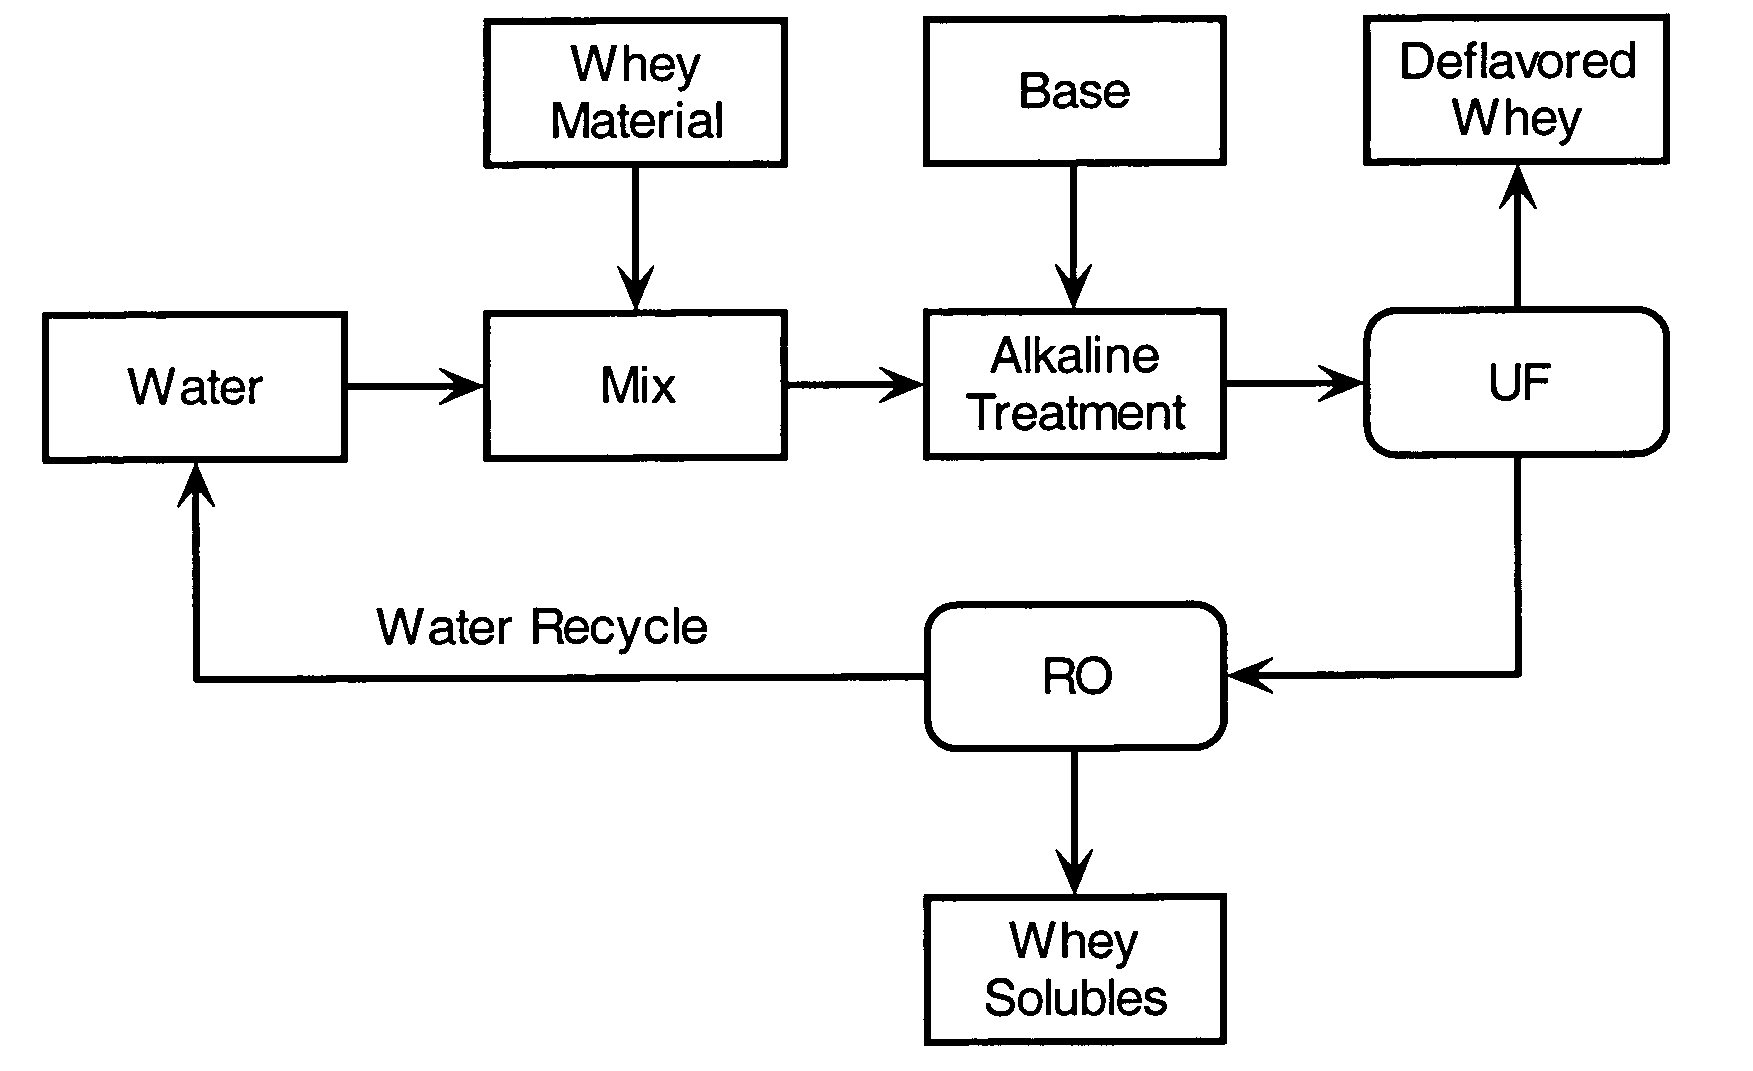 Method of deflavoring whey protein